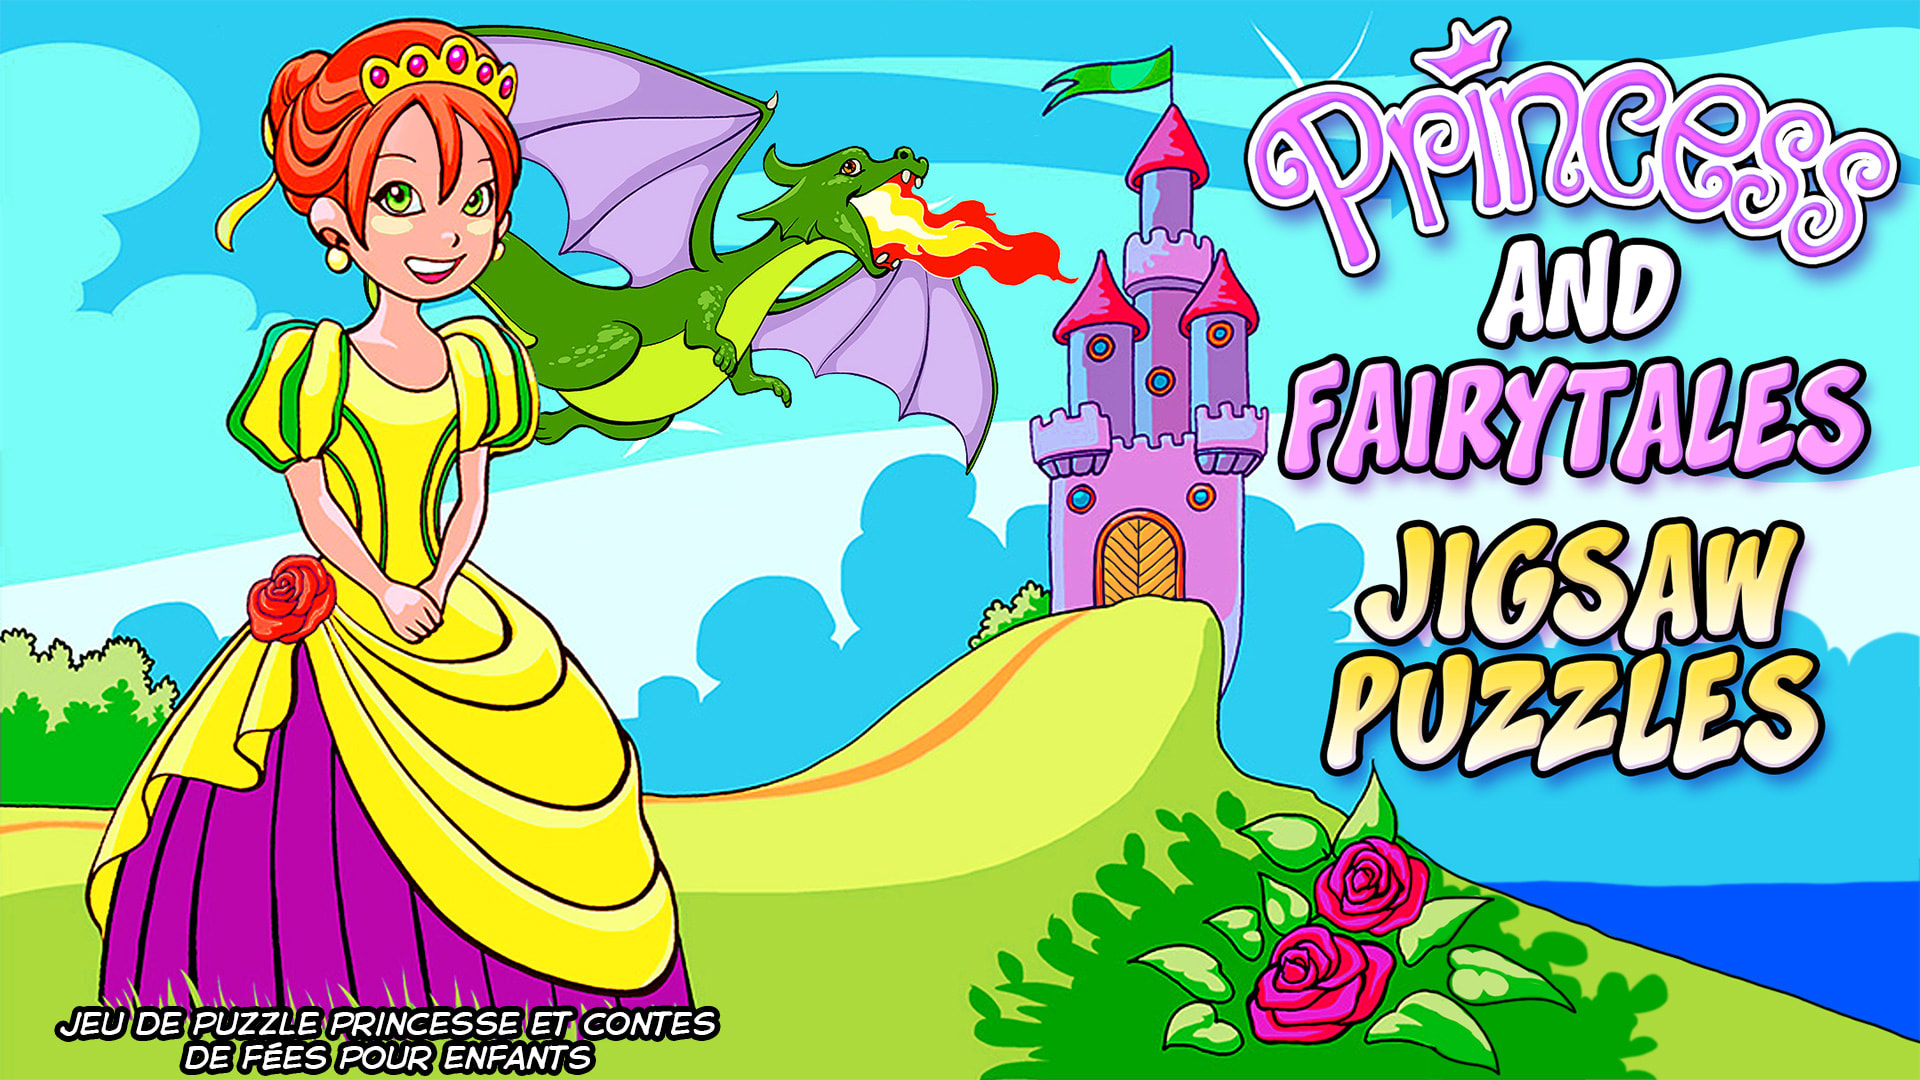 Princess and Fairytales Jigsaw Puzzles - Puzzle Game for Kids 1